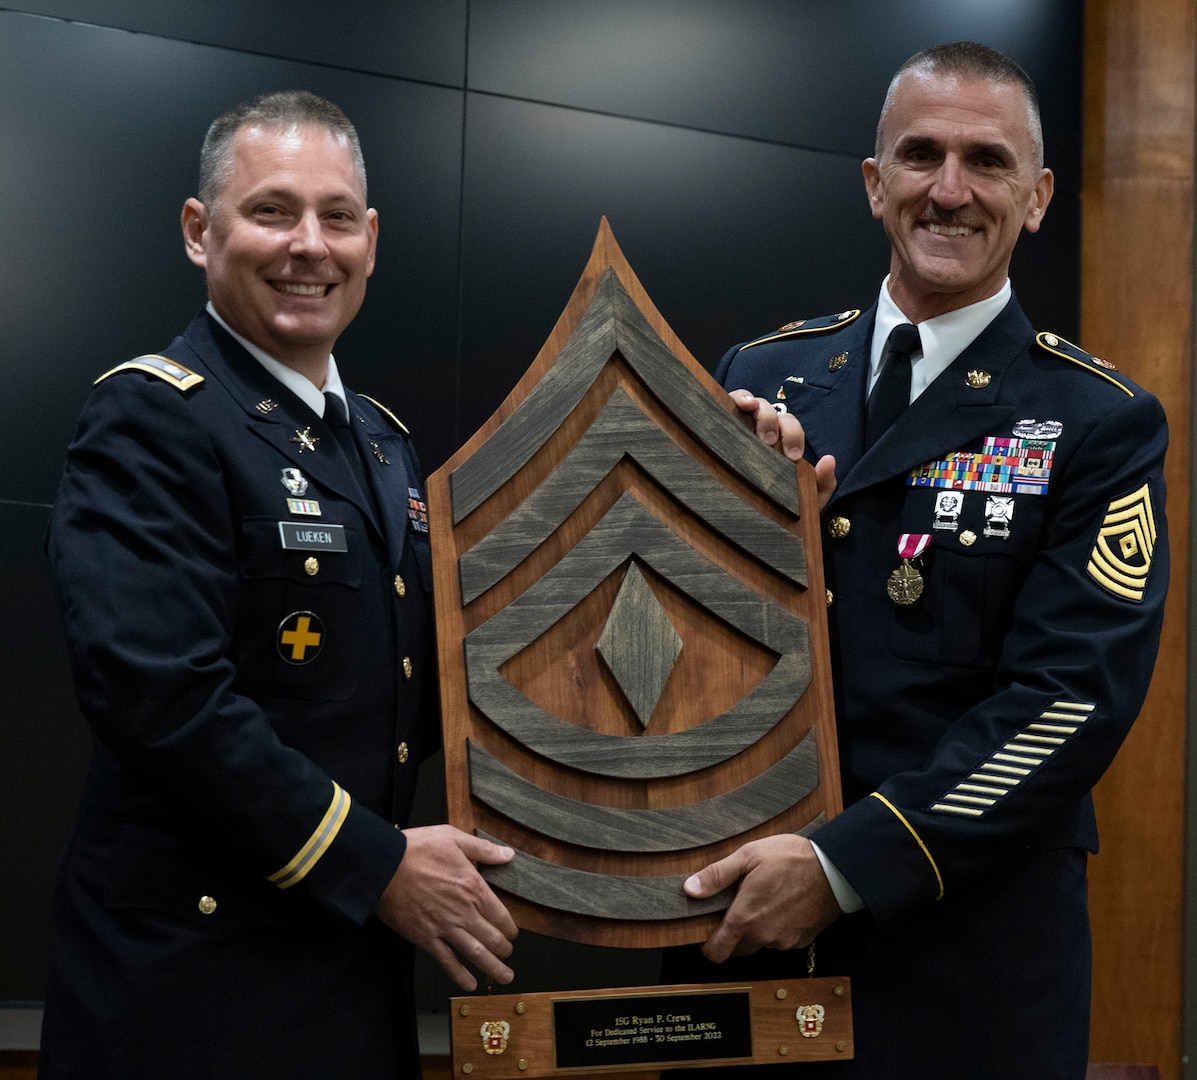 Lt. Col. Mark Lueken, who serves as the deputy G-6 during drill status duty, presents Illinois Army National Guard 1st Sgt. Ryan Crews of Mount Vernon, Illinois, a wooden wall plaque in honor of Crews’ more than 34 years of military service at the retirement ceremony Aug. 7 at the Illinois Military Academy, Camp Lincoln, Springfield.